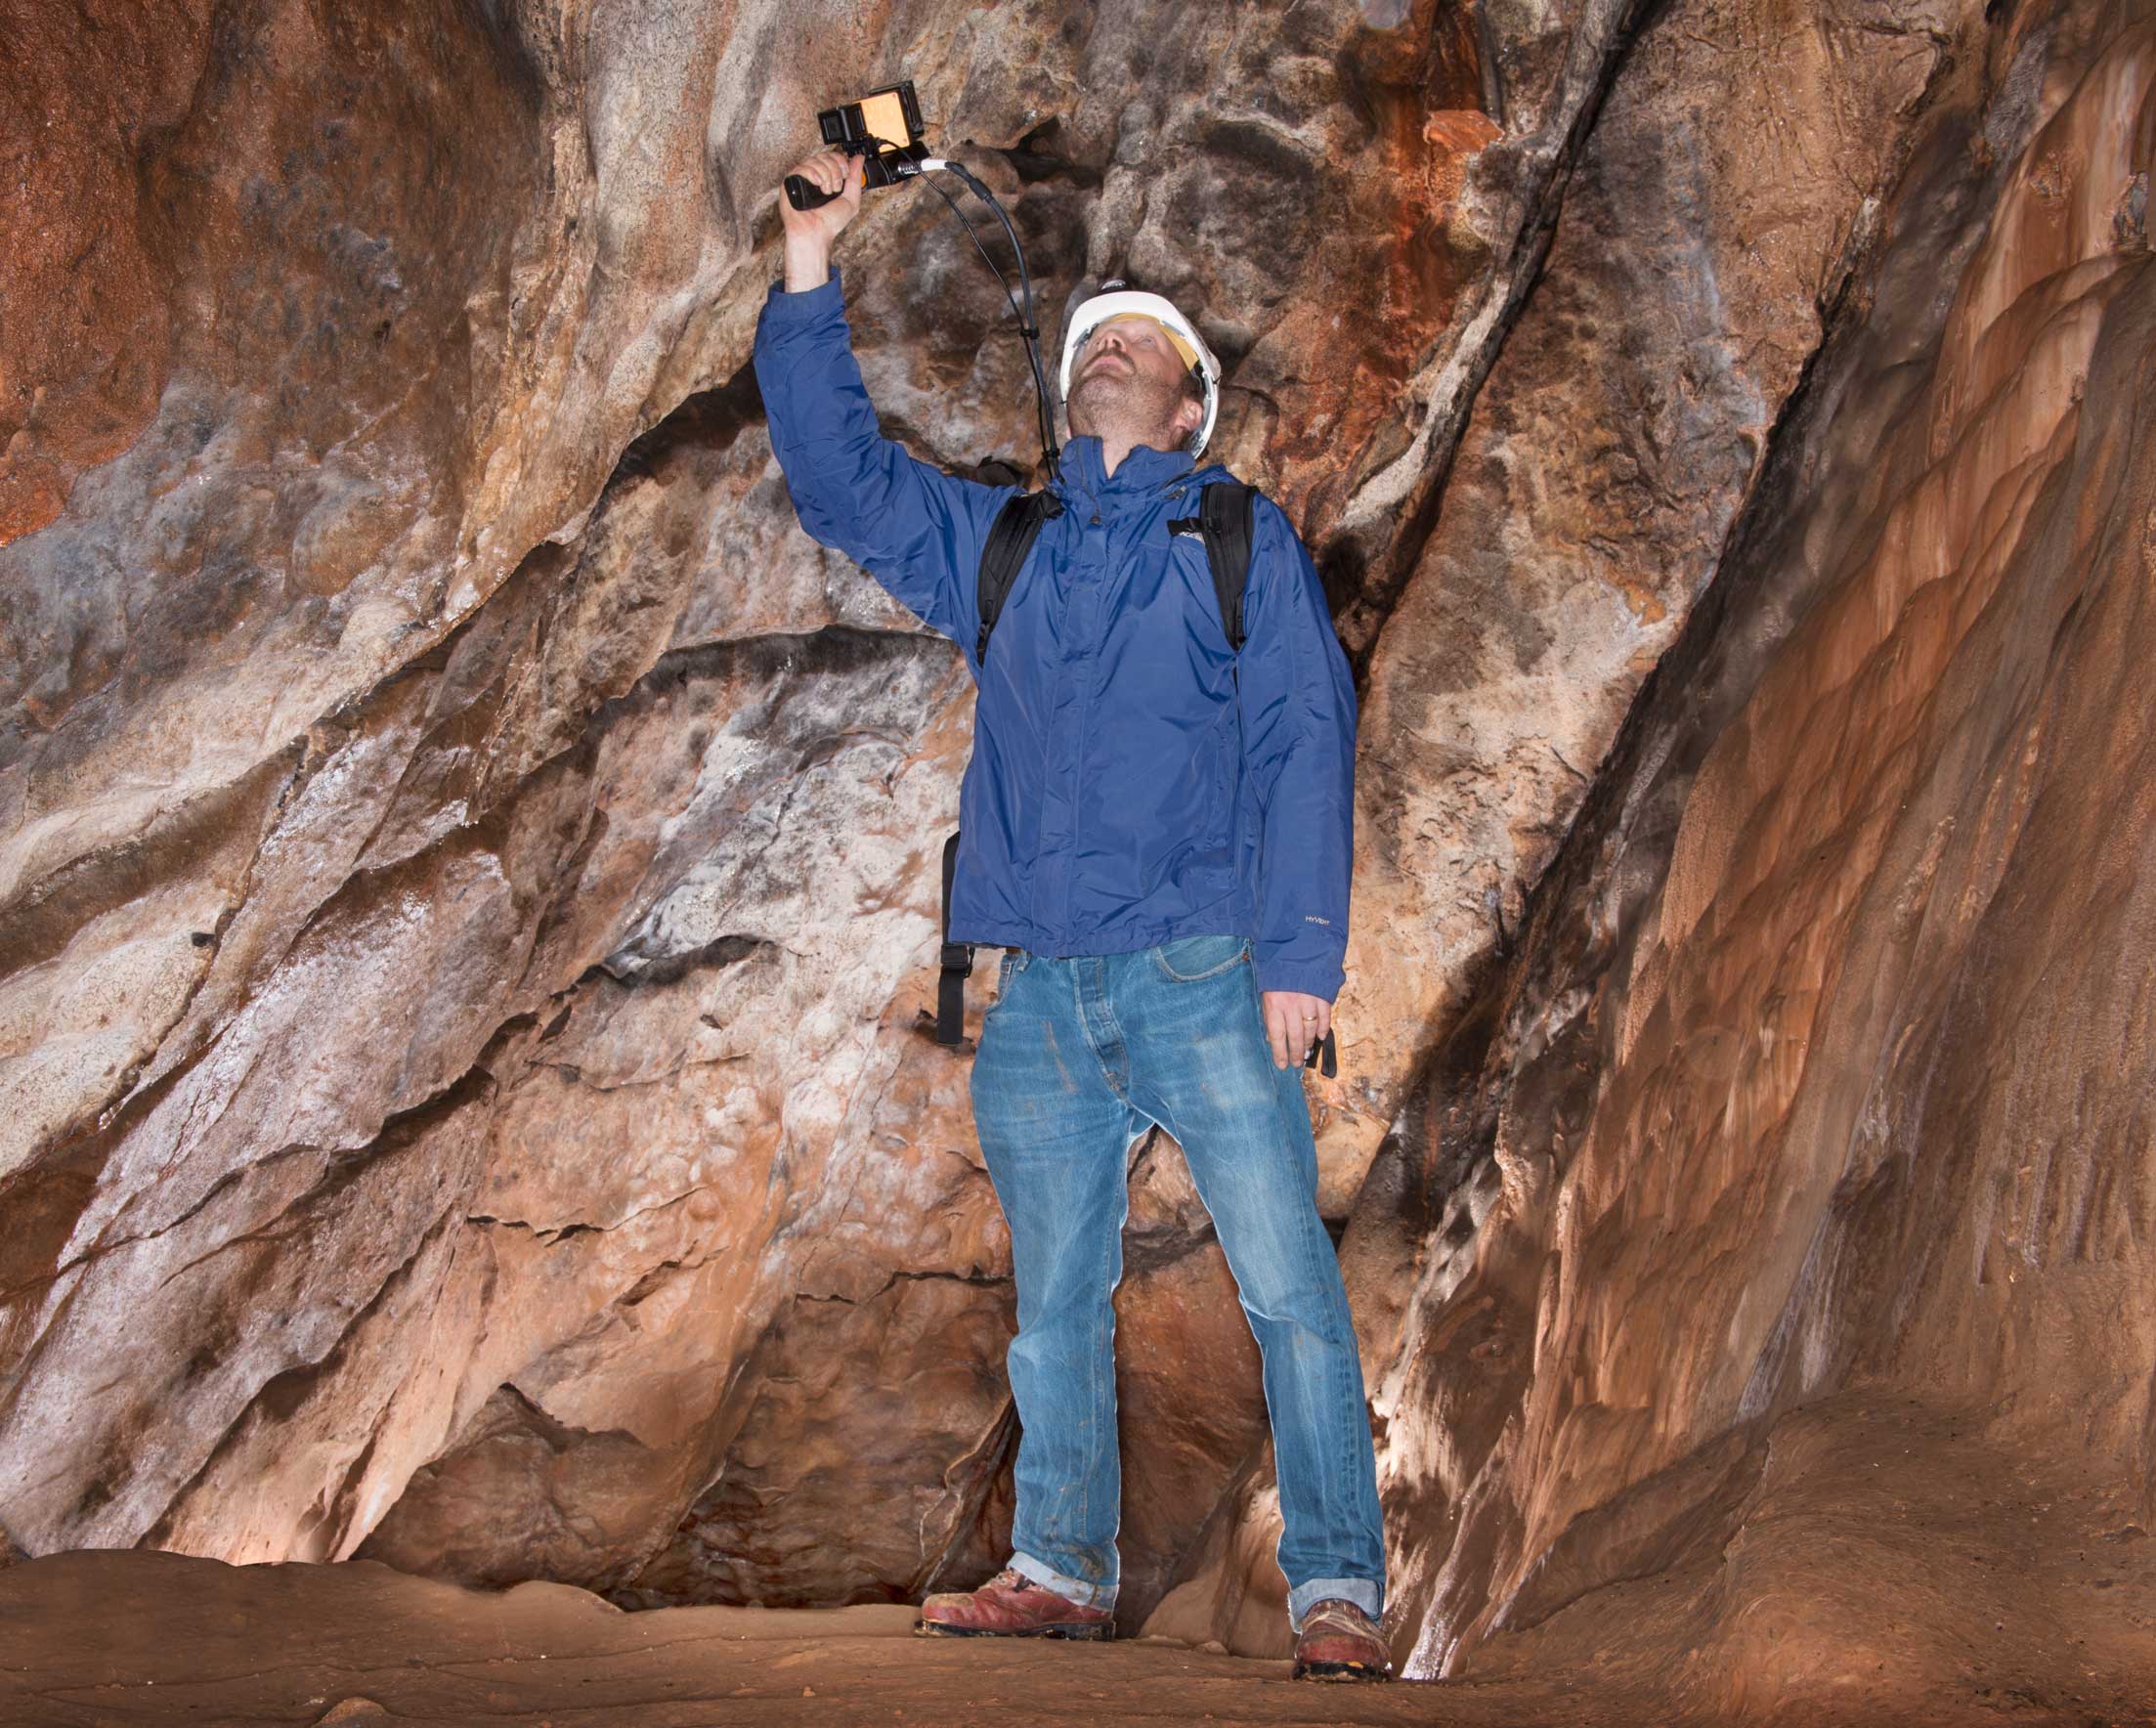 Man standing in a cave wearing outdoor clothing and hard hat, holds a scanning device above his head and looks up towards the roof of the cave.